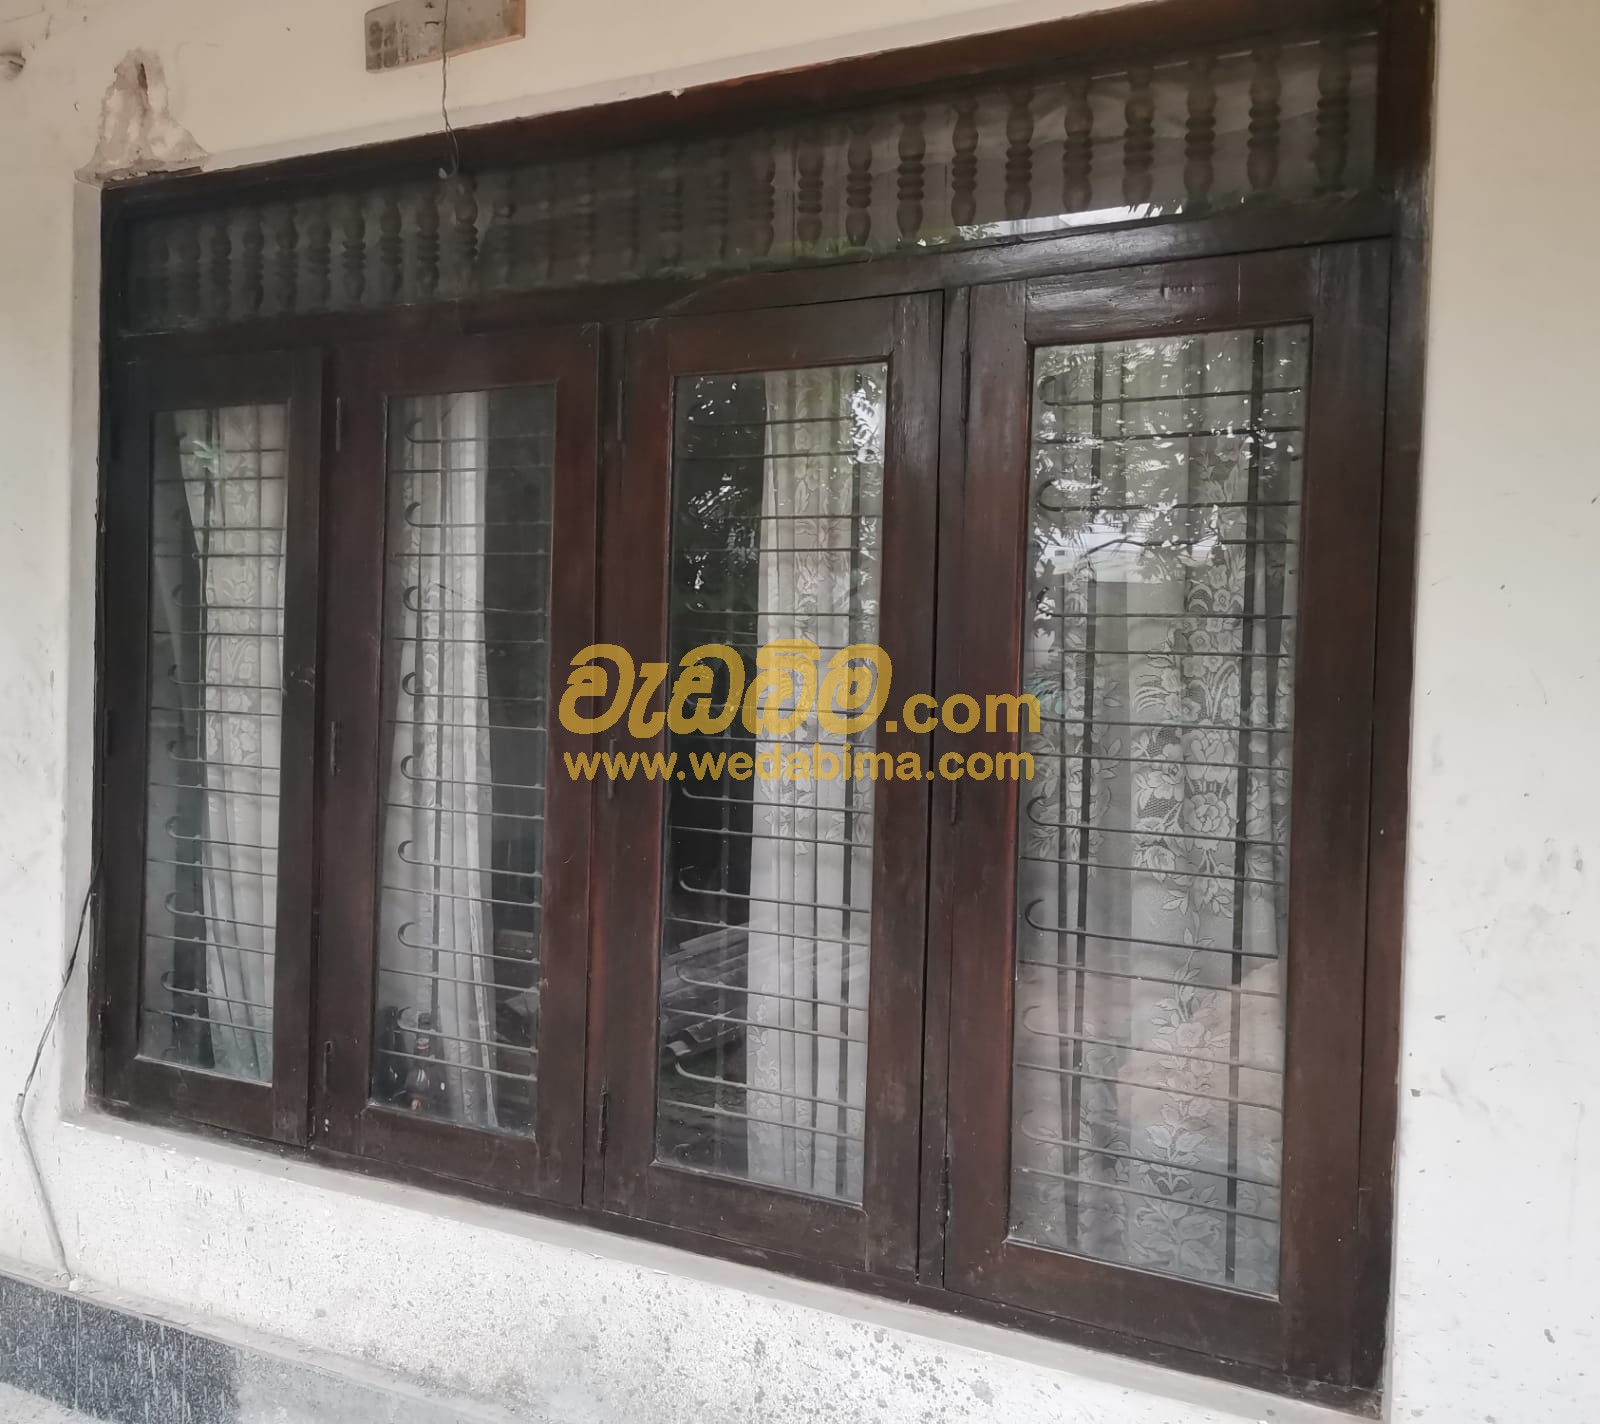 Used Windows and Frames for Sale | Wattala